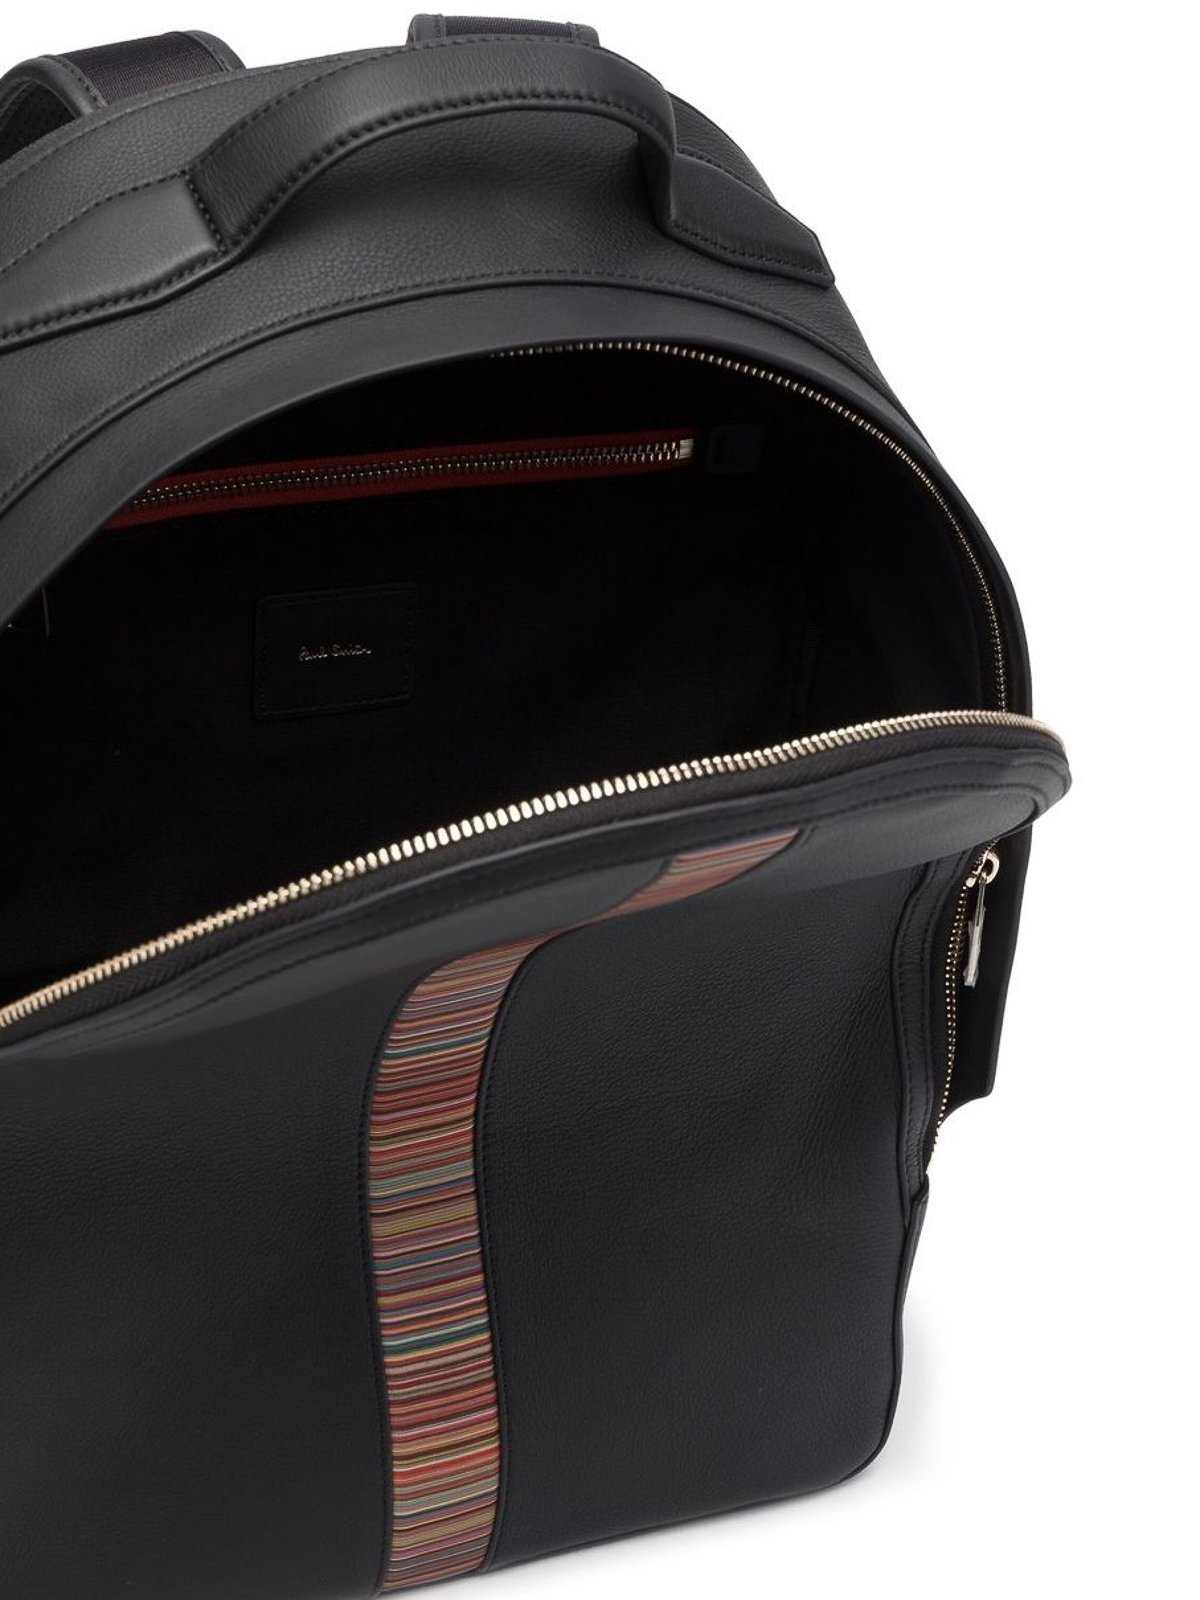 Paul Smith - Black Leather Signature Backpack